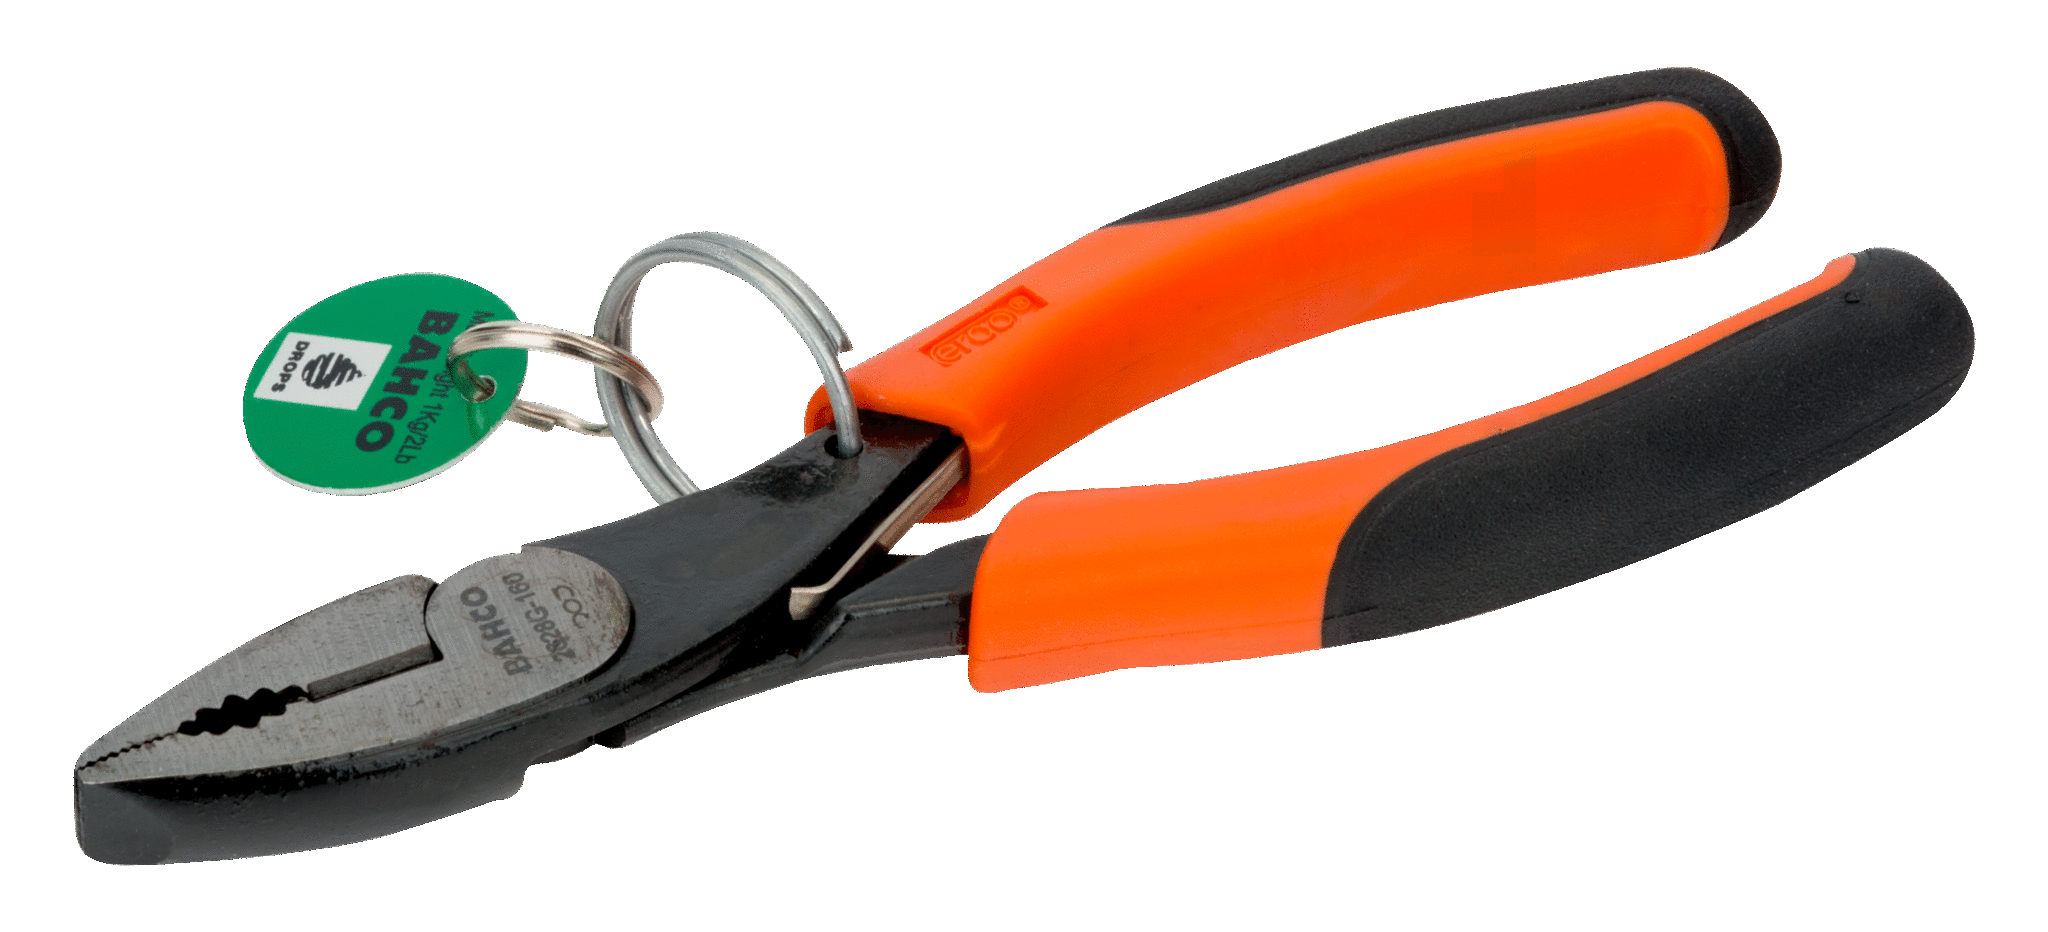 Bahco 2628g Combination Pliers Ergo Handles 160mm for sale online